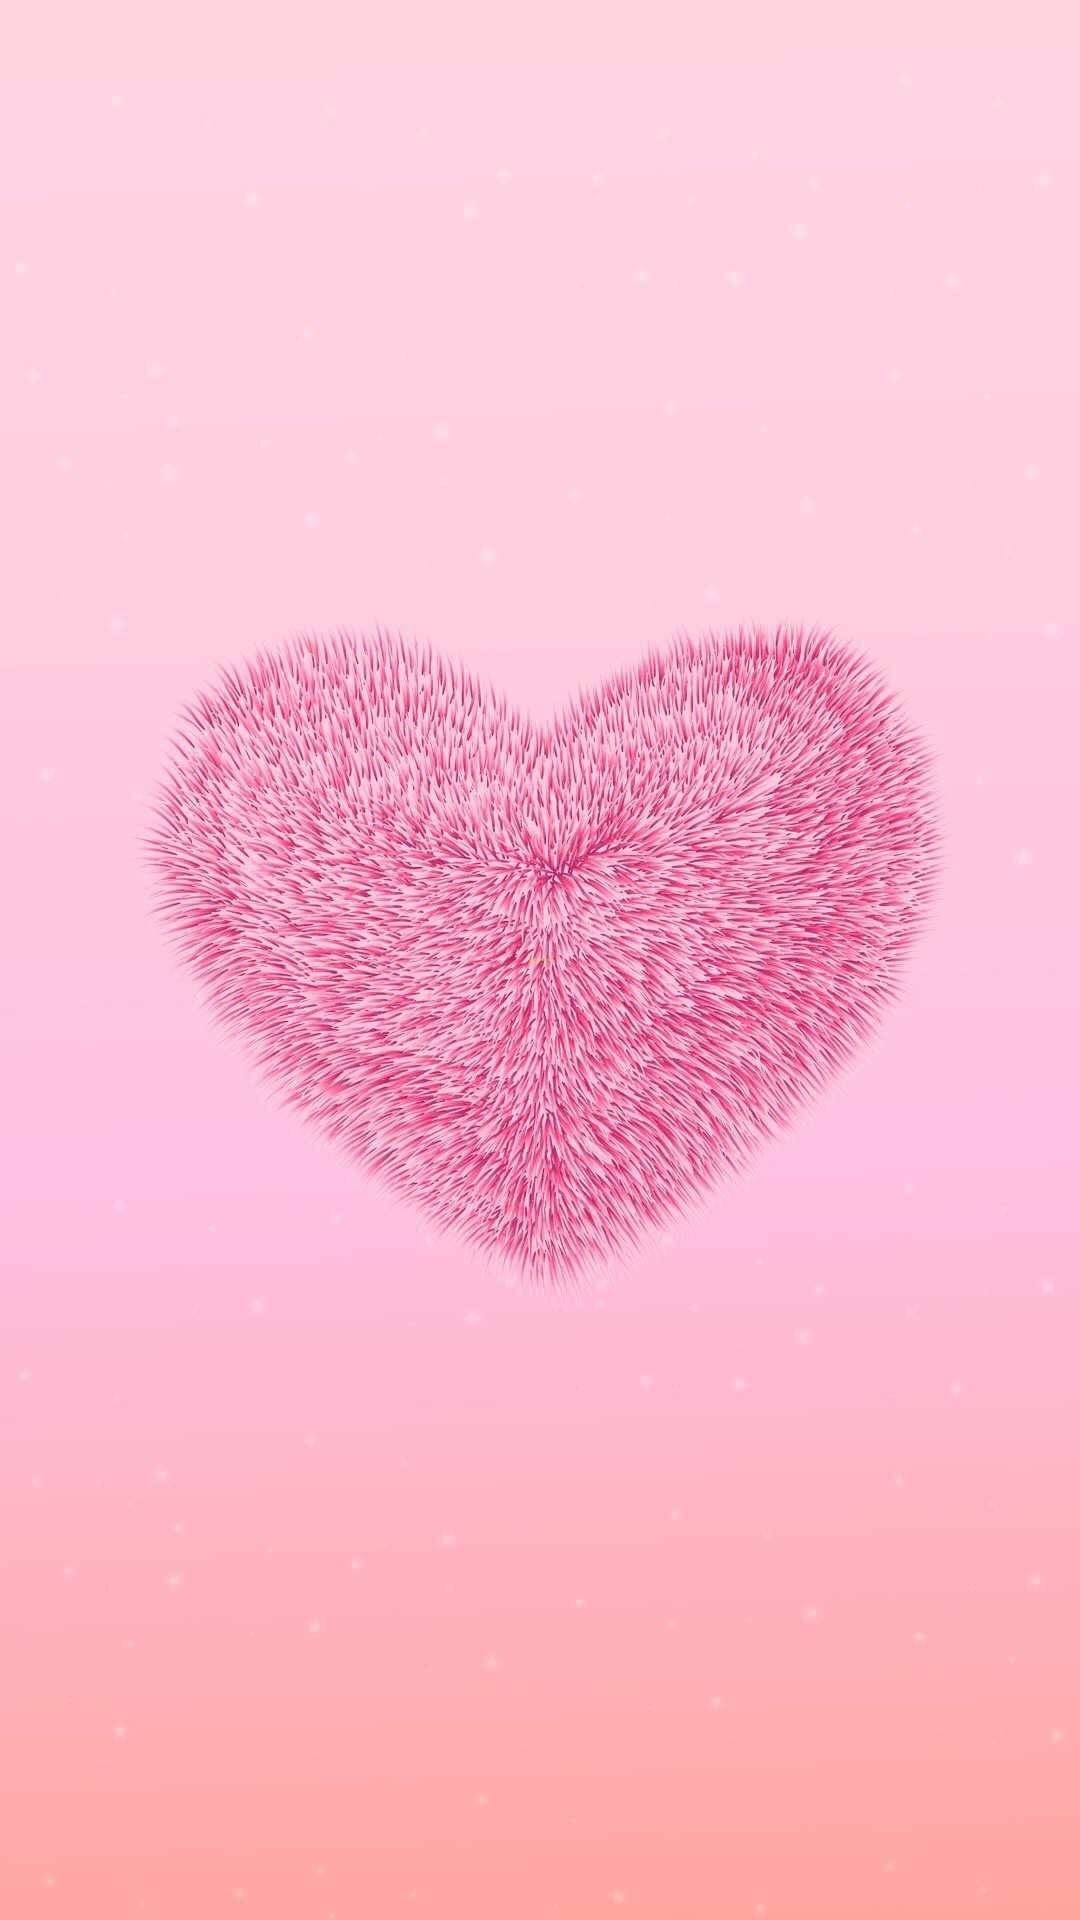 Aesthetic Pink Heart Wallpaper For Computer